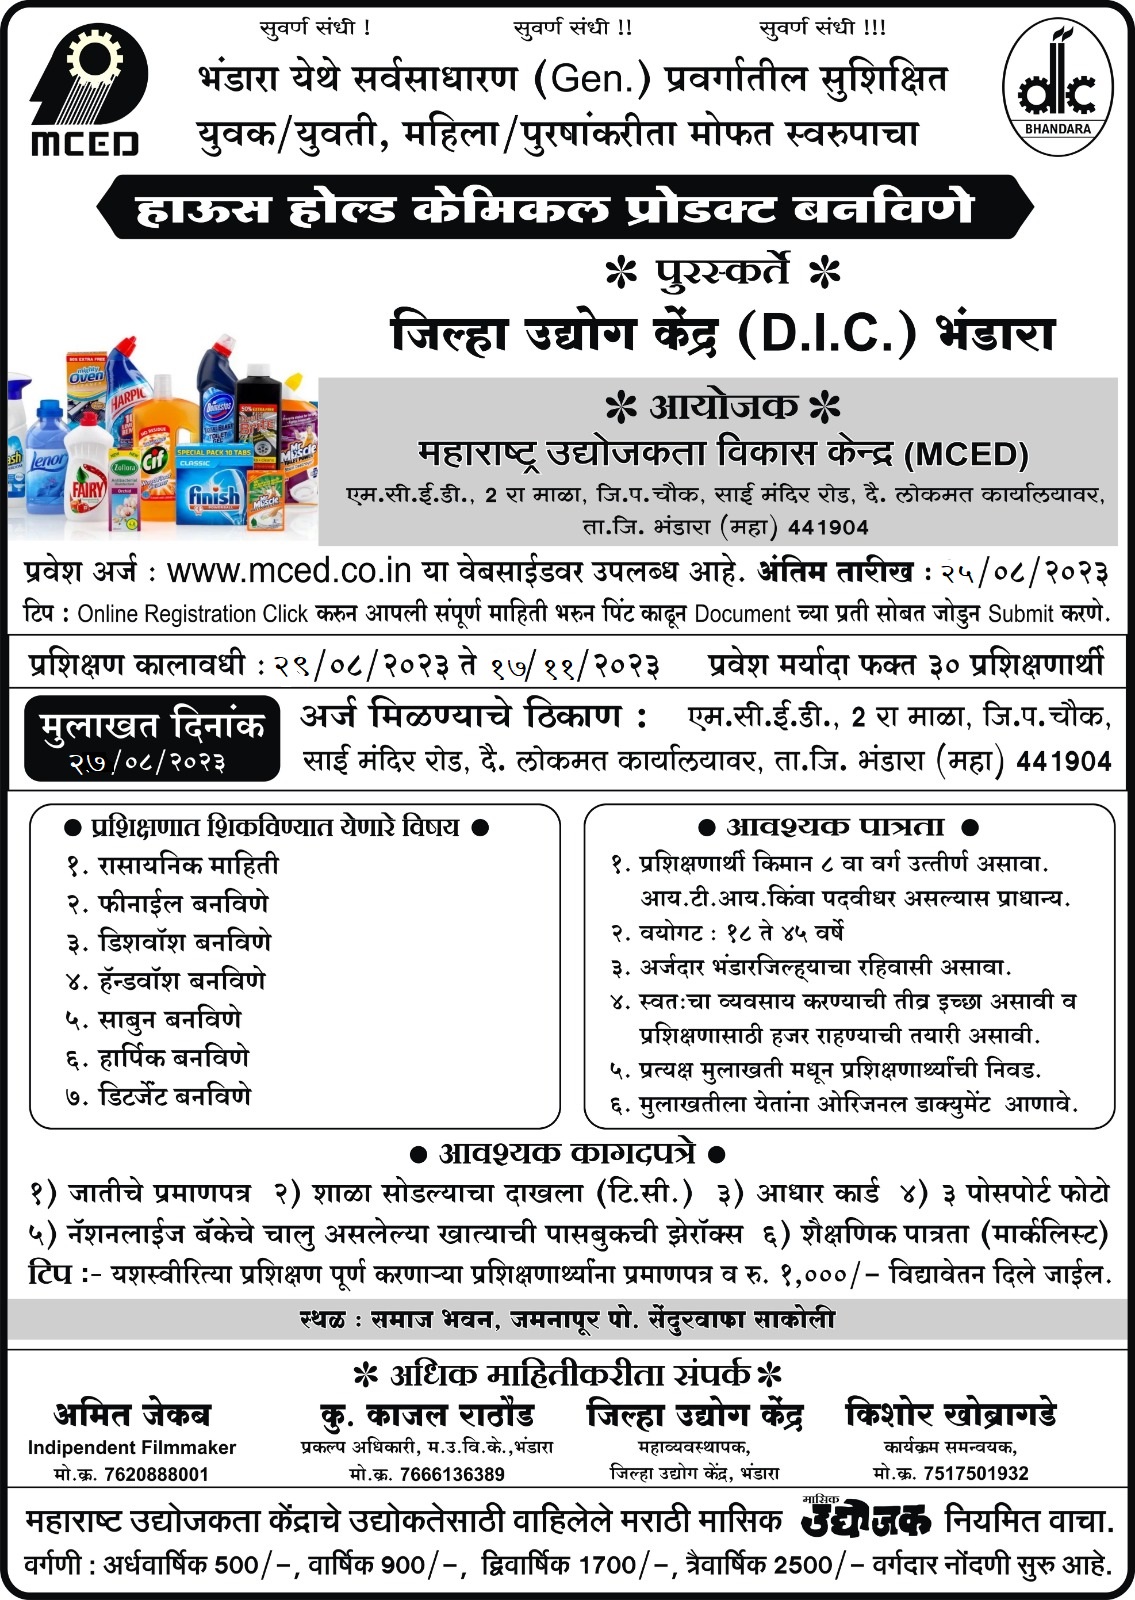 HOUSEHOLD CHEMICAL PRODUCTS PREPARATION TRAINNG PROGRAMME